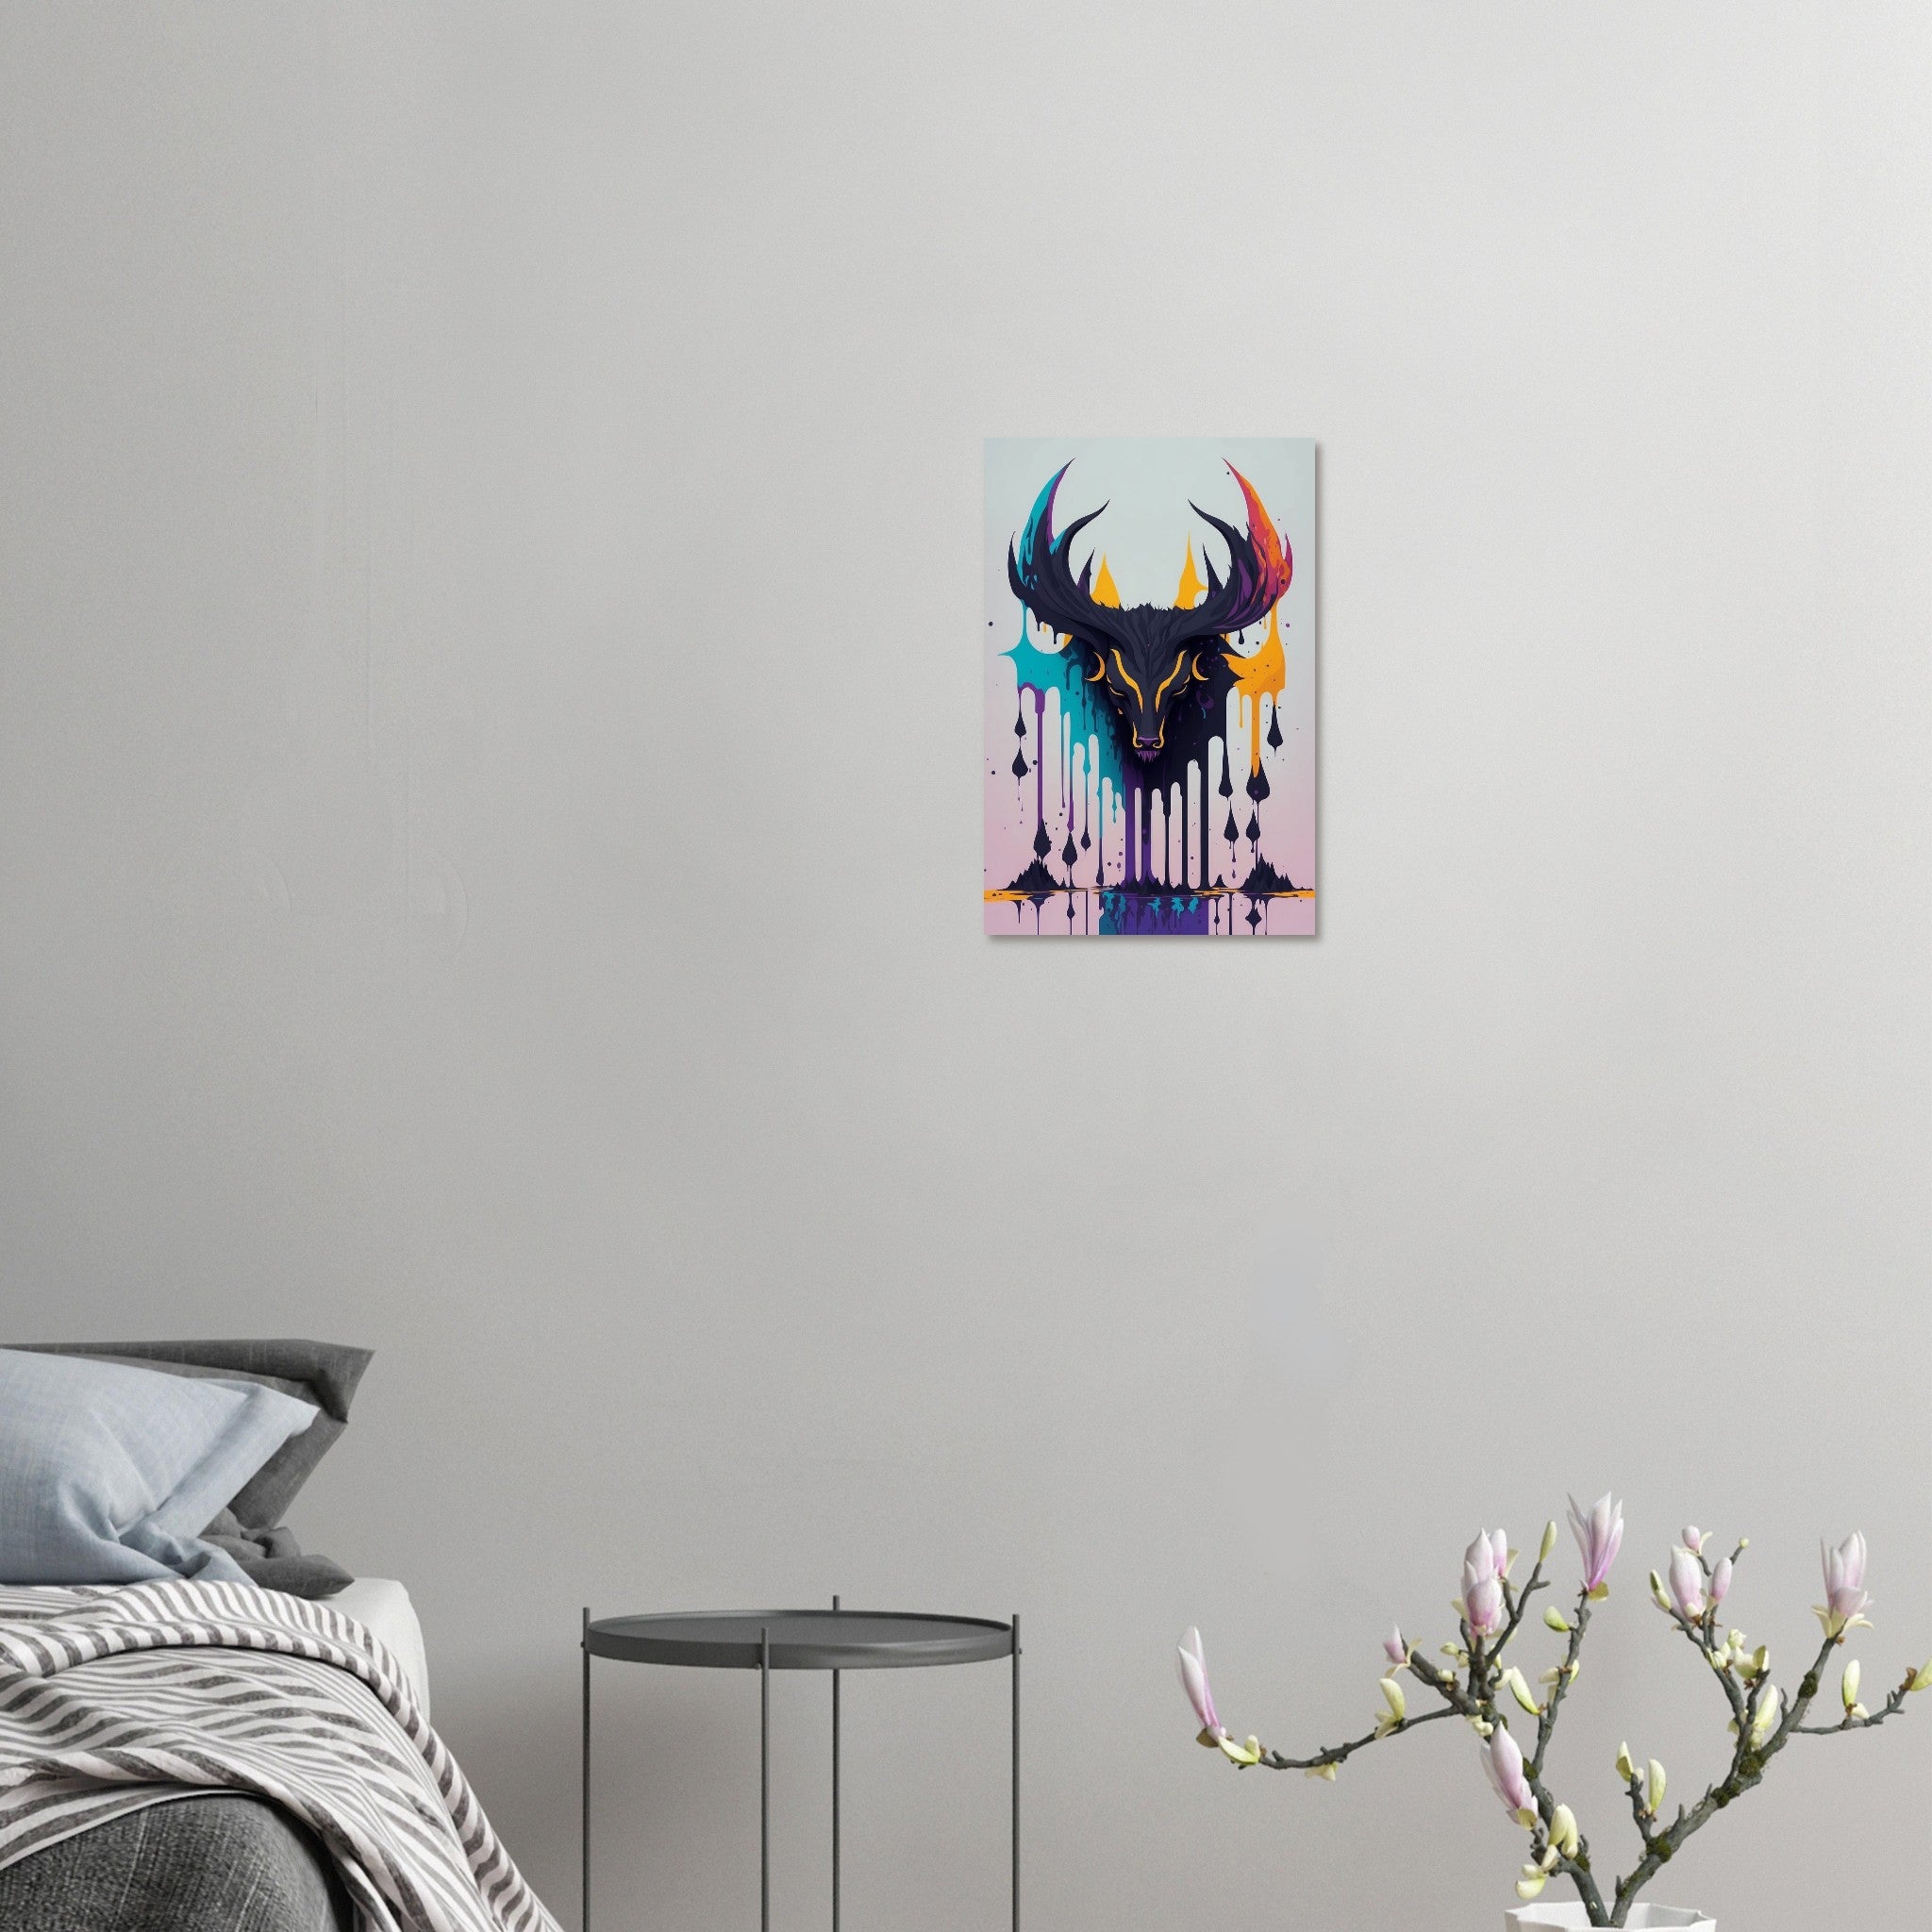 "Liquid Longhorn" Metal Poster Print Design by the online-based home interior company, Radiartvector.